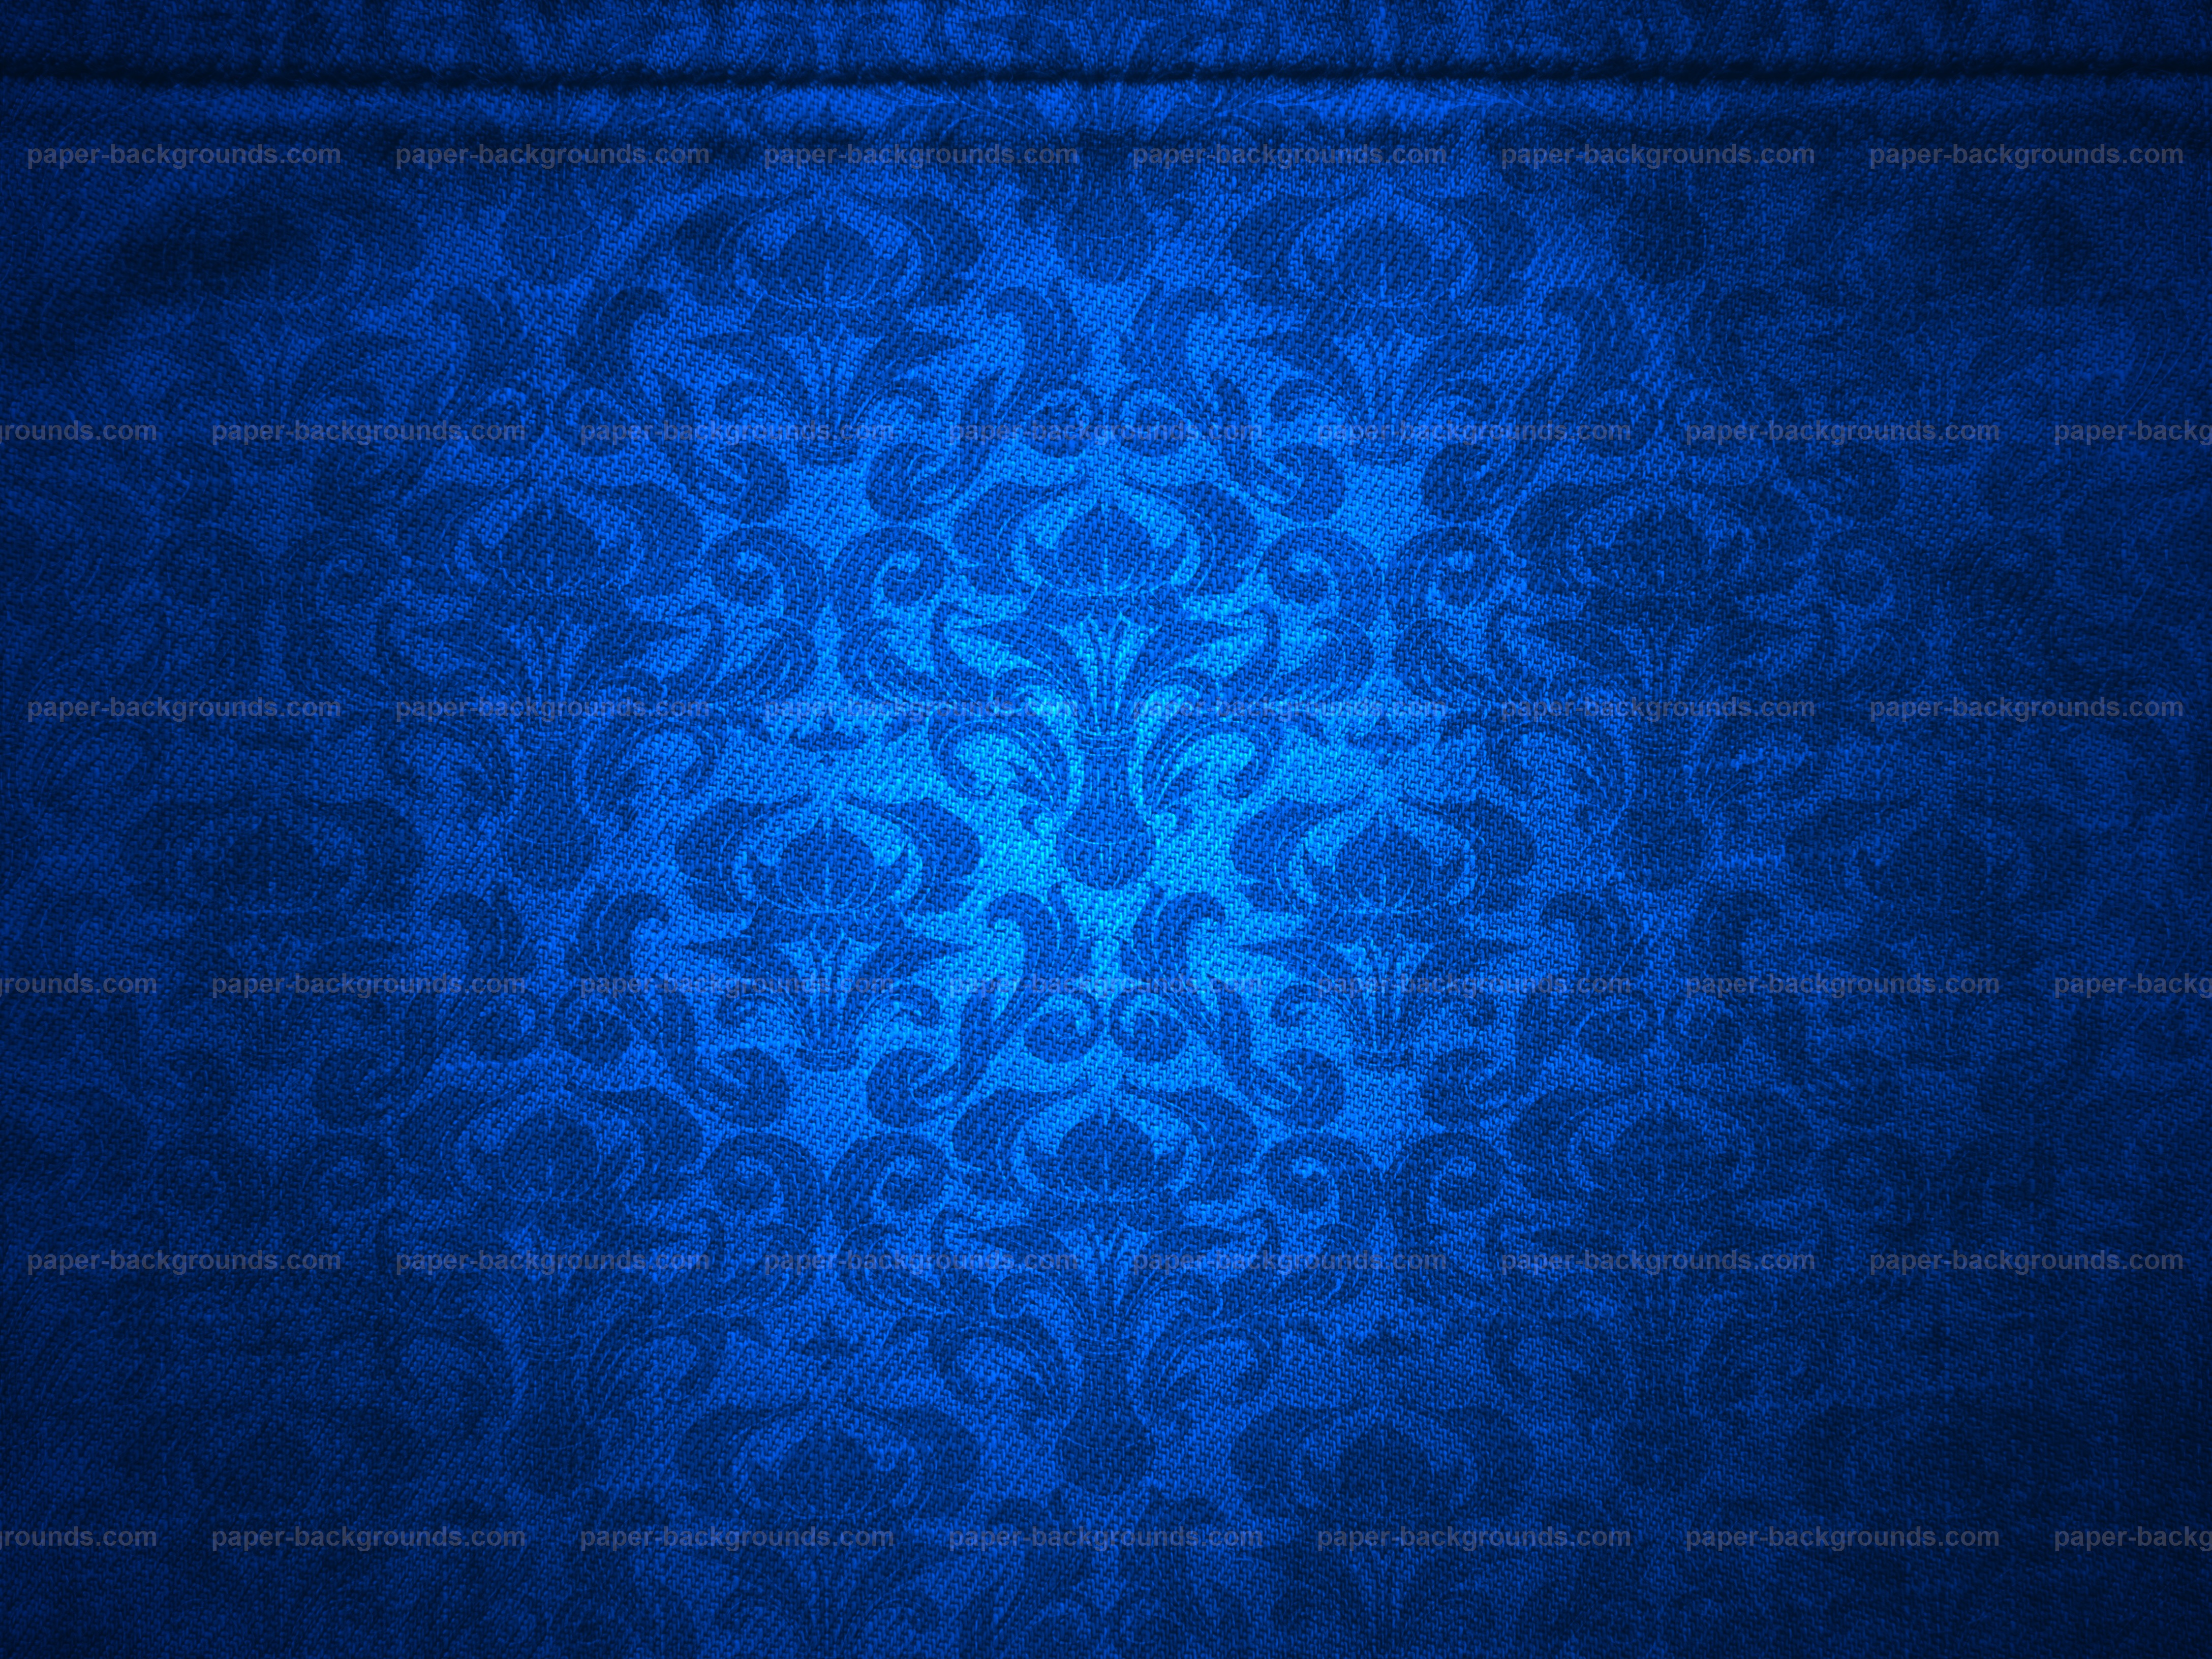 Paper Backgrounds | Blue Canvas with Damask Pattern Background